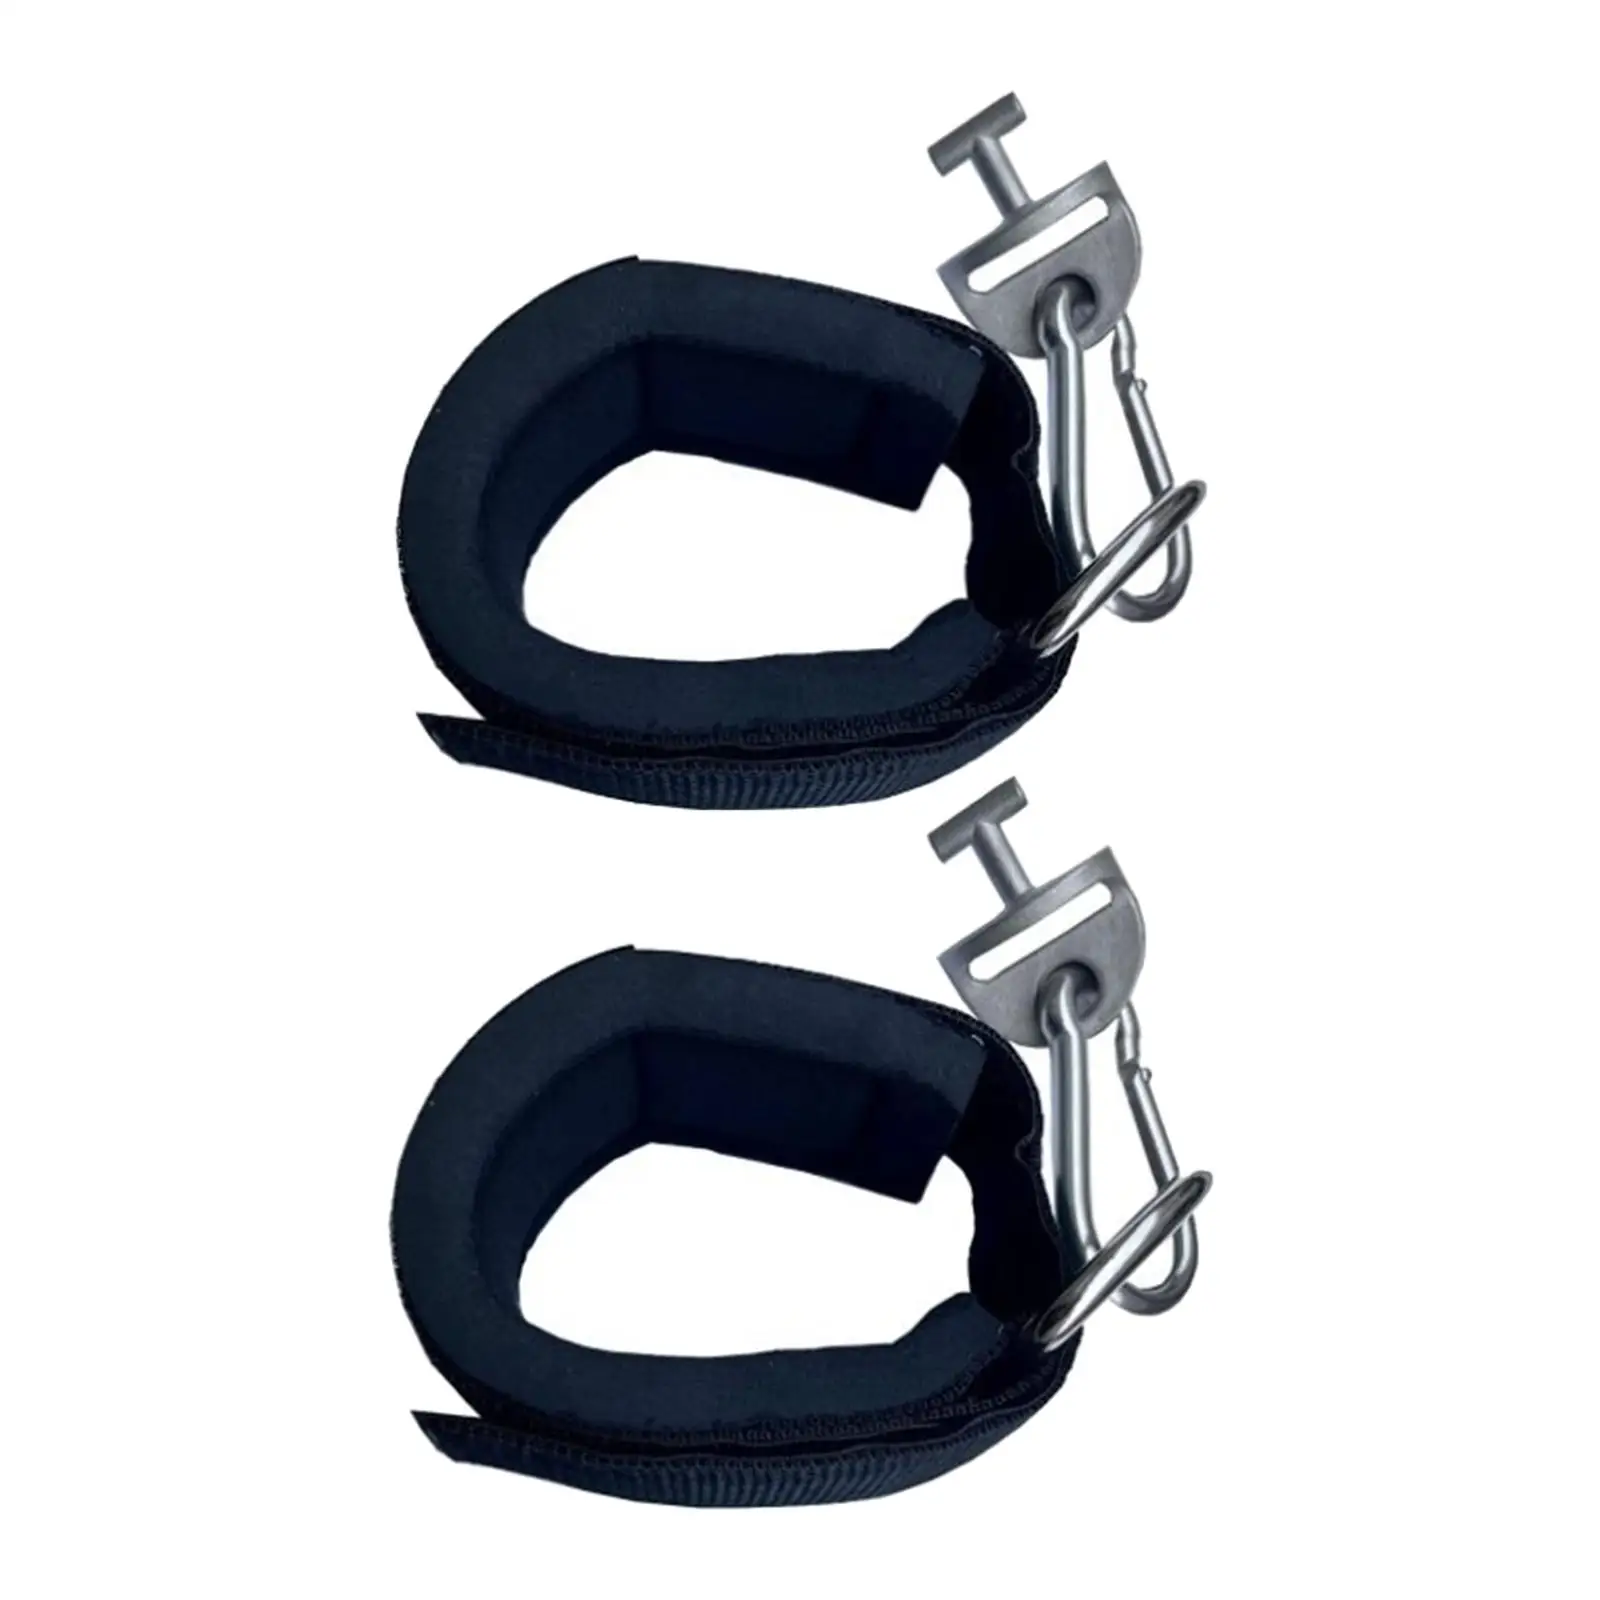 Ankle Straps for Tonal Cable Machine Tonal Attachment for Kickbacks Glute